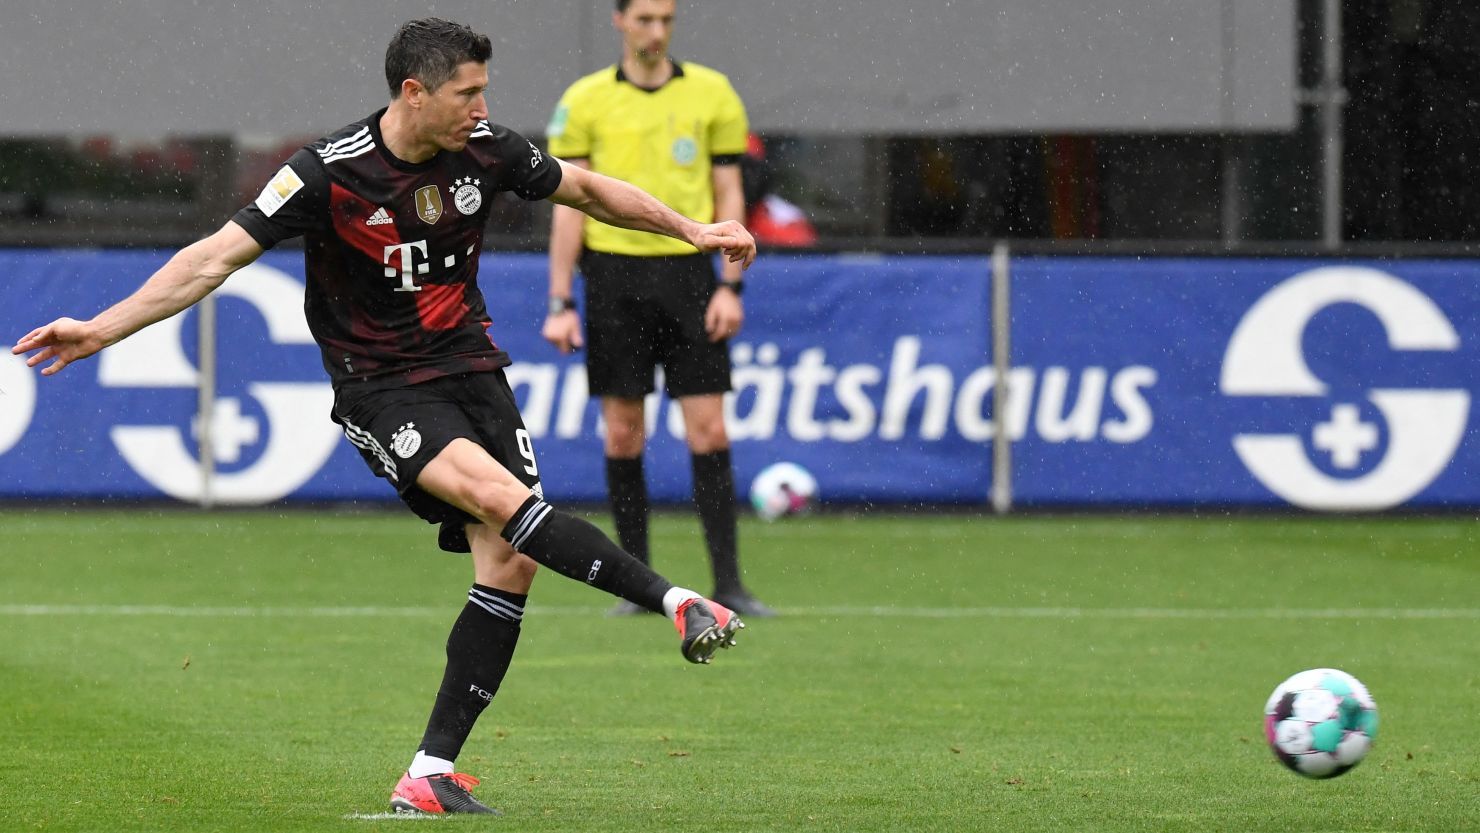 Lewandowski scores from the penalty spot to bring up his 40th league goal of the season.